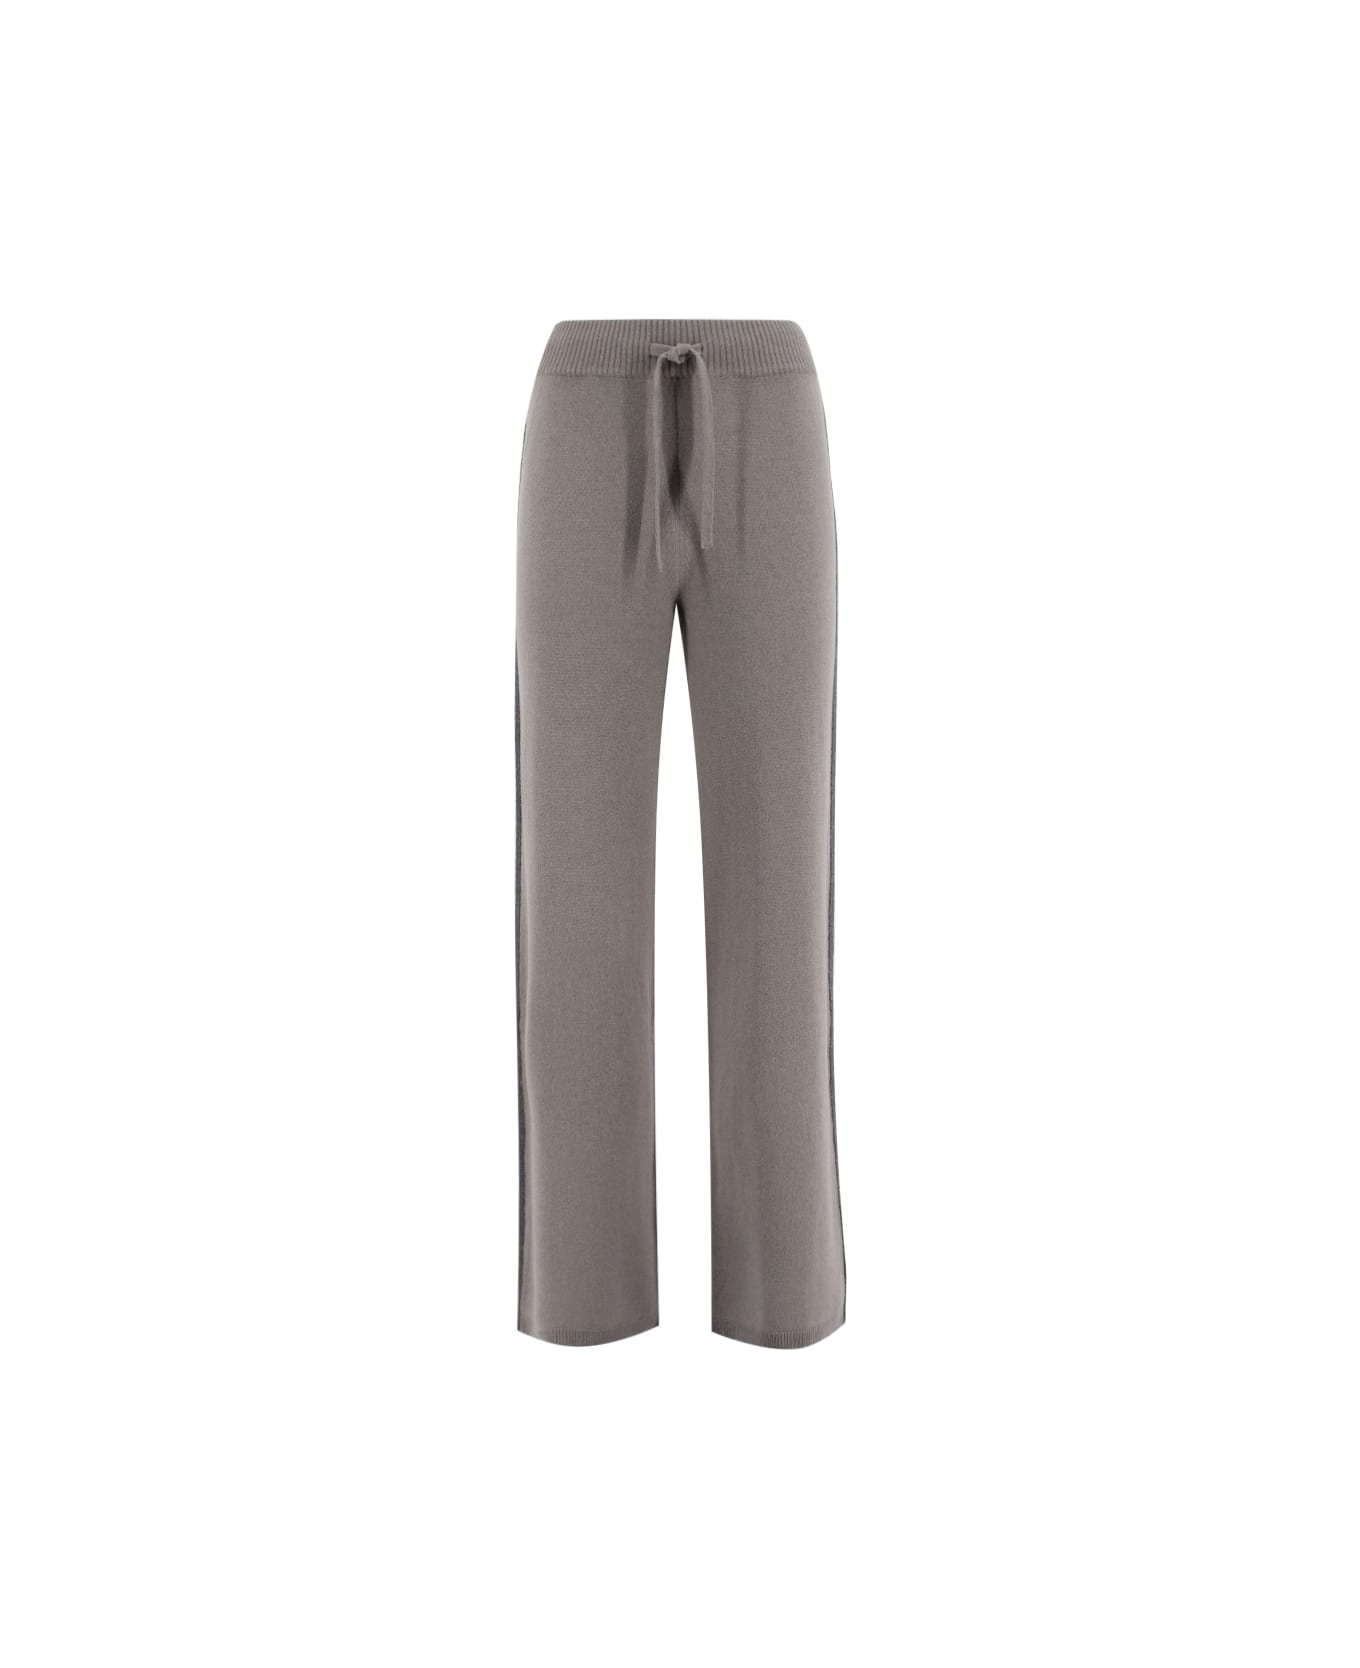 Le Tricot Perugia Trousers - D.TAUPE/D.GREY      